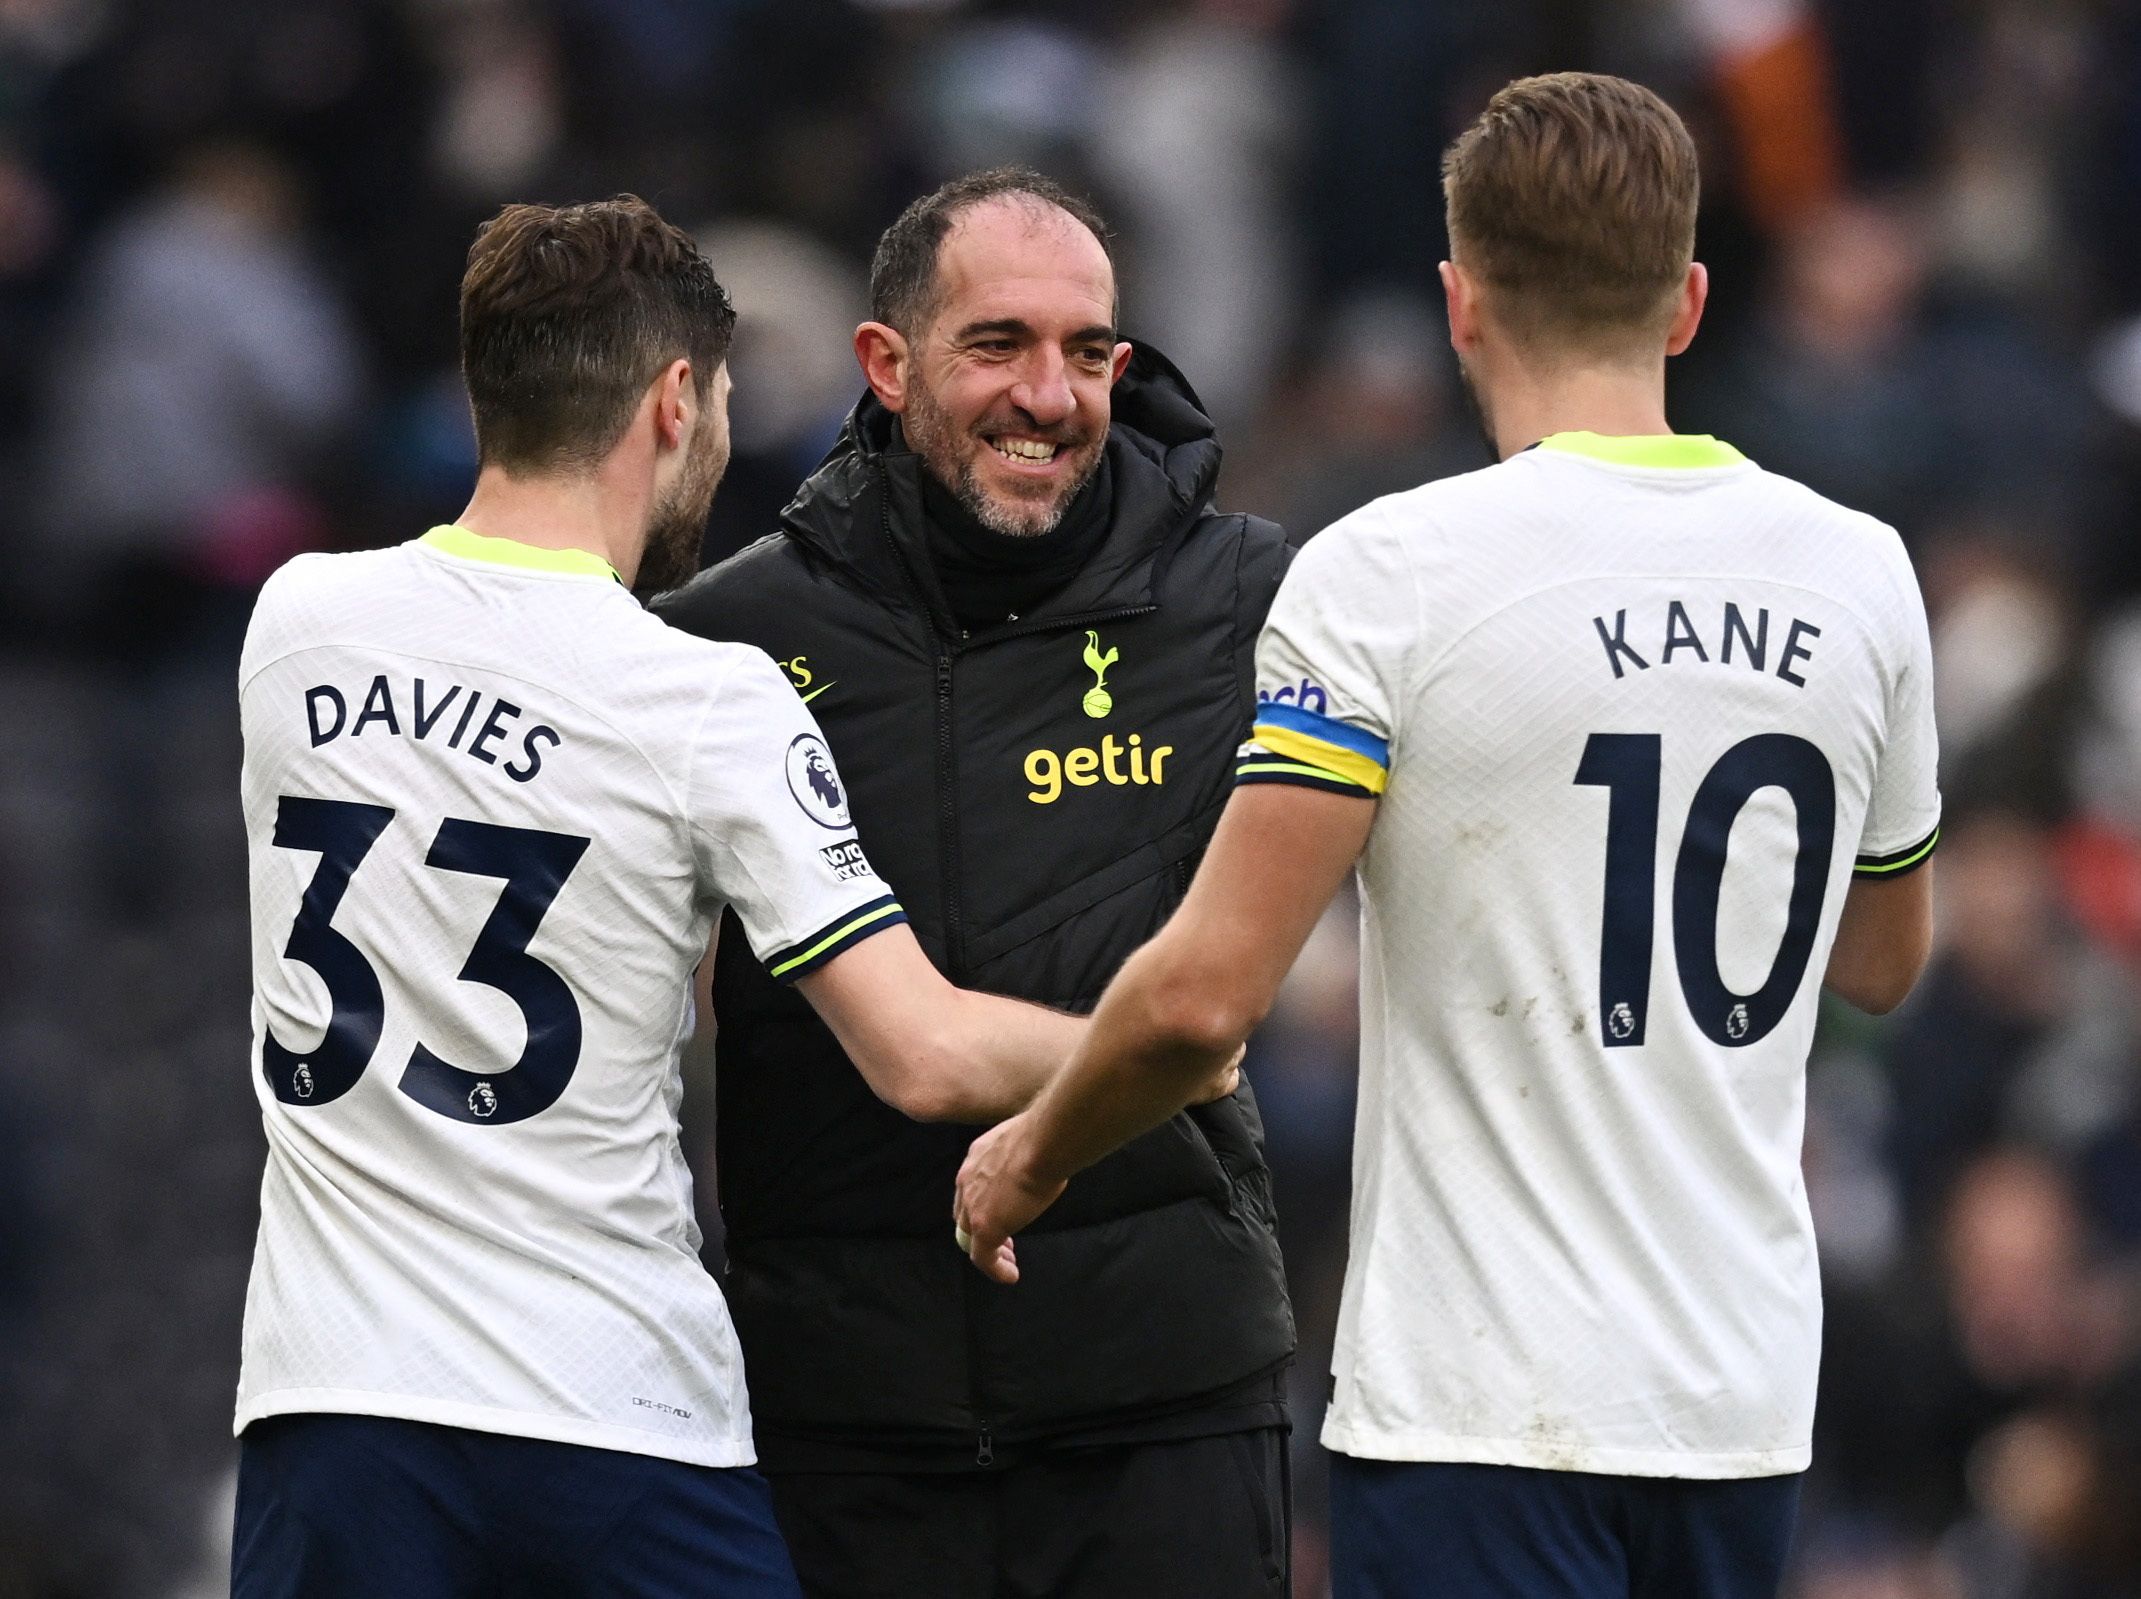 Tottenham Hotspur assistant manager Cristian Stellini, Ben Davies and Harry Kane celebrate after the match